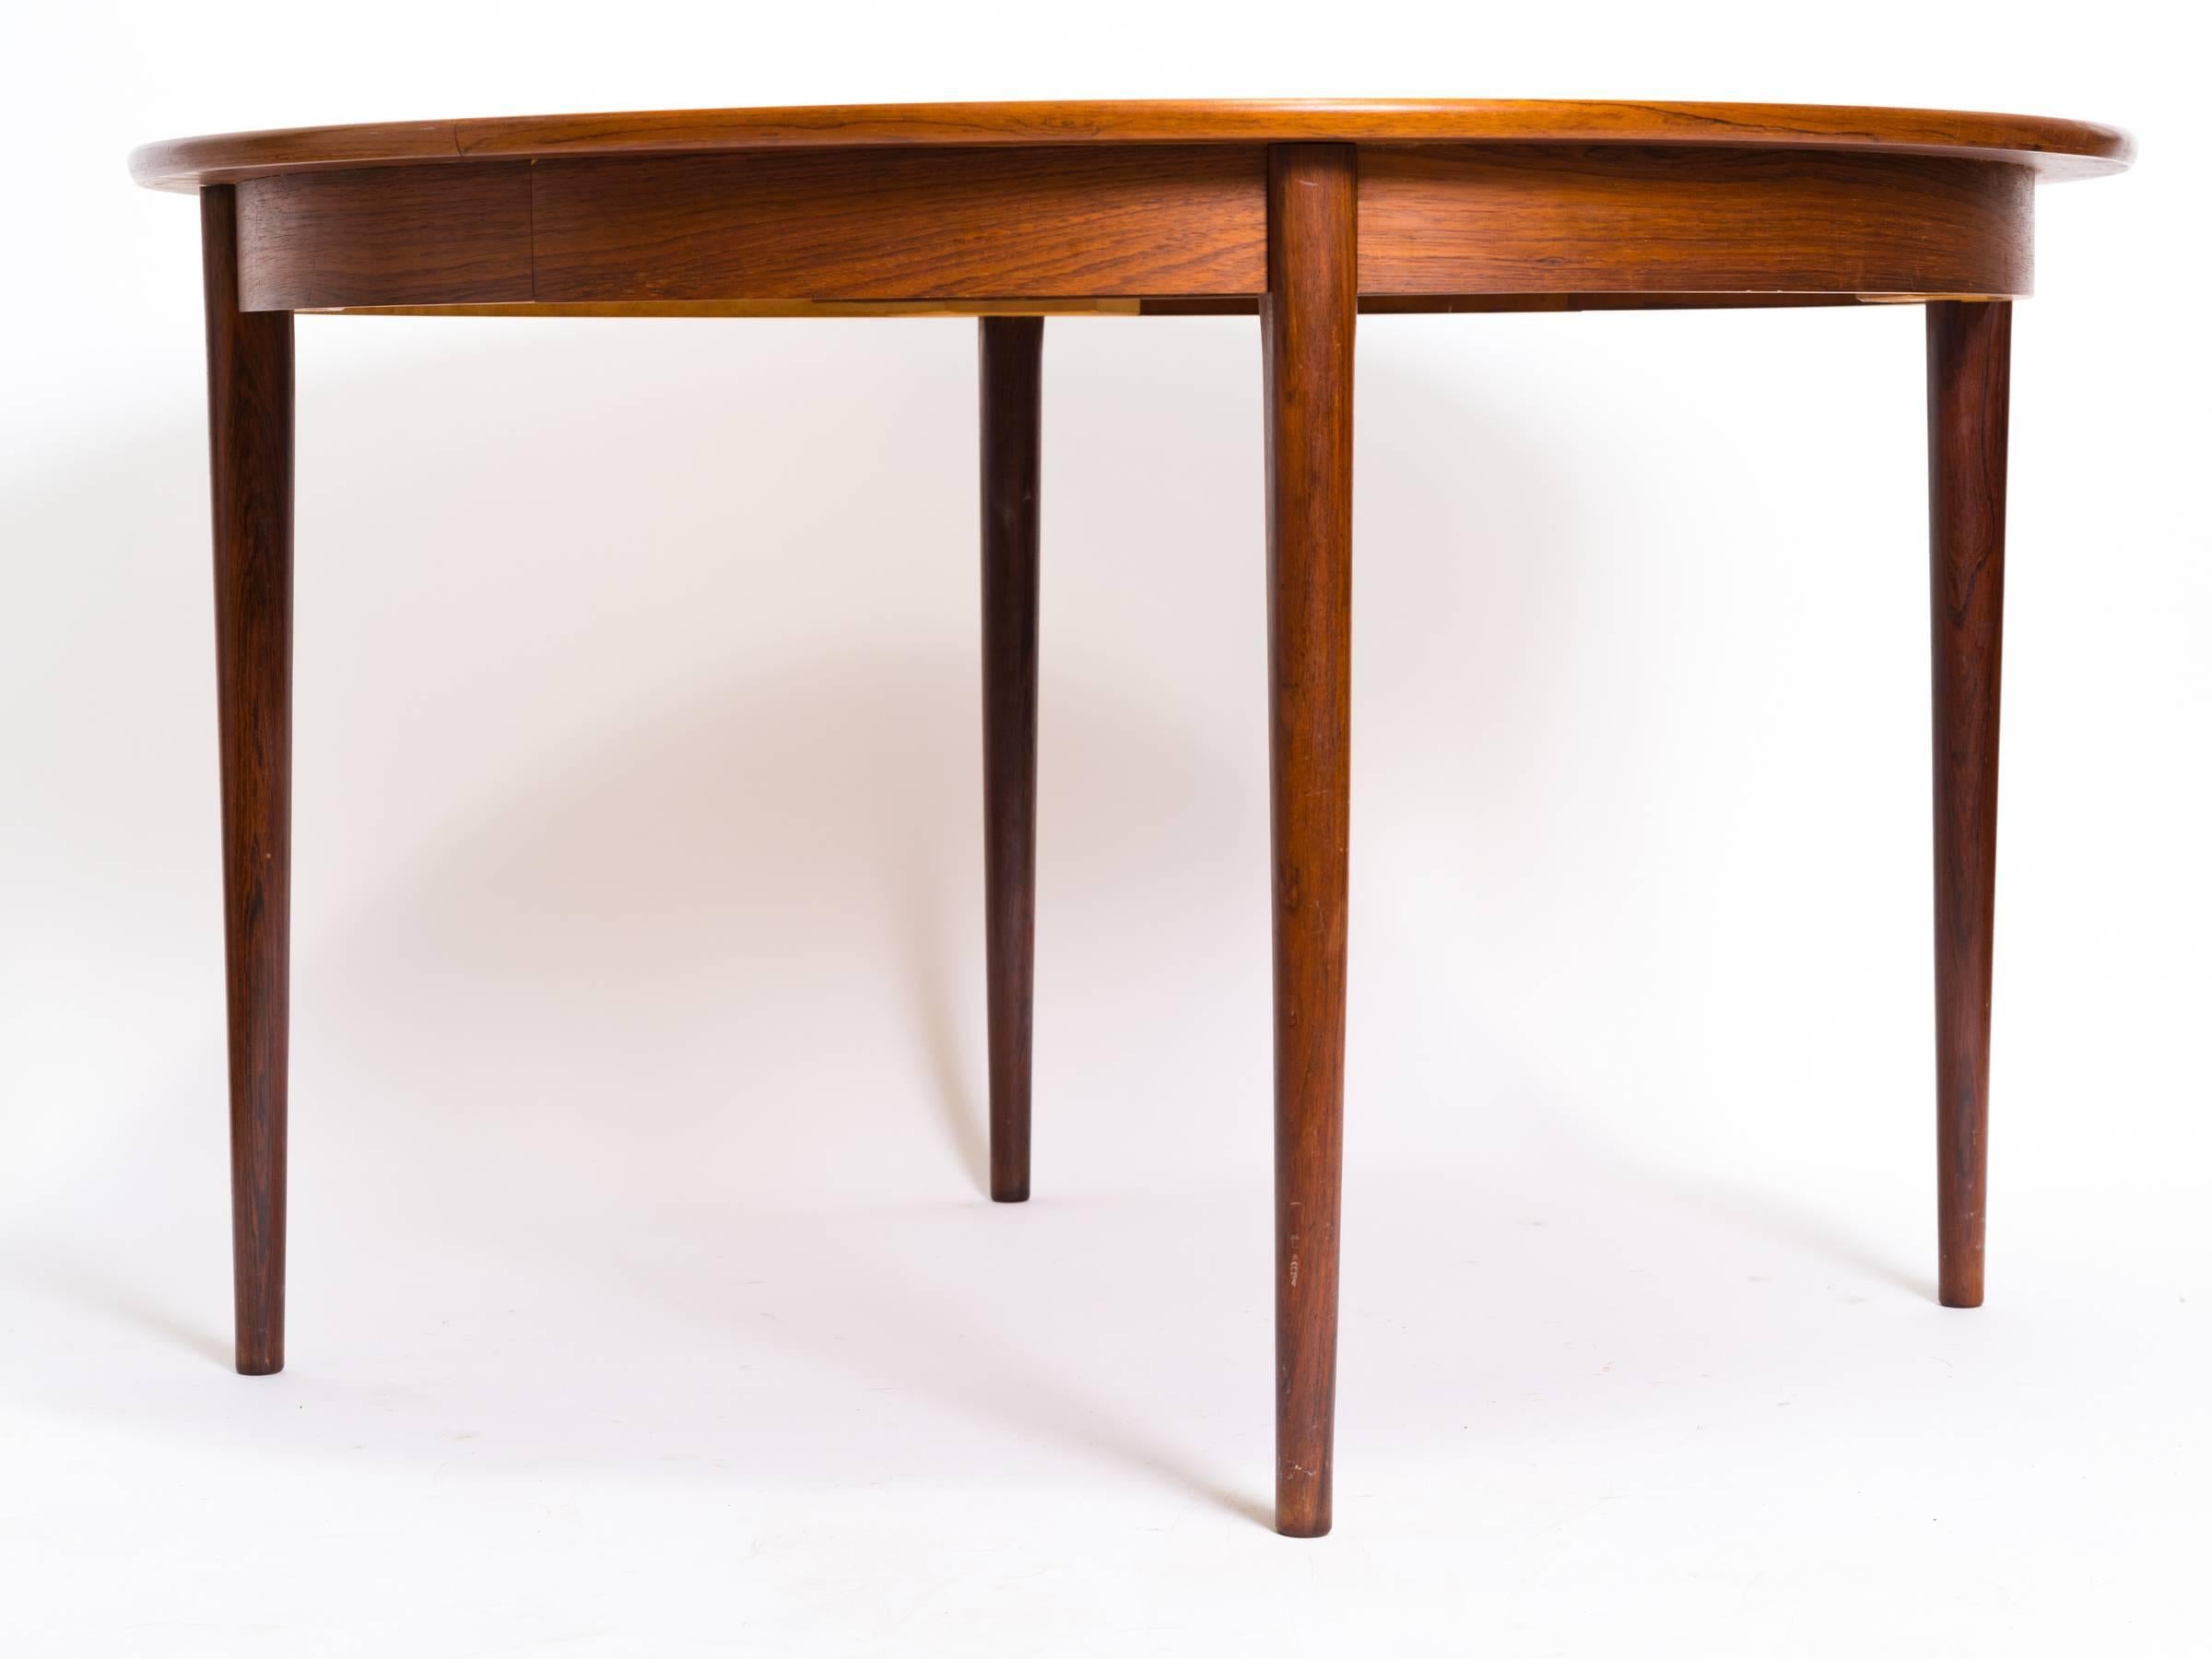 Gustav Bahus rosewood dining table with two 19.5 inch leaves.

Length of table with leaves is 86 inches.